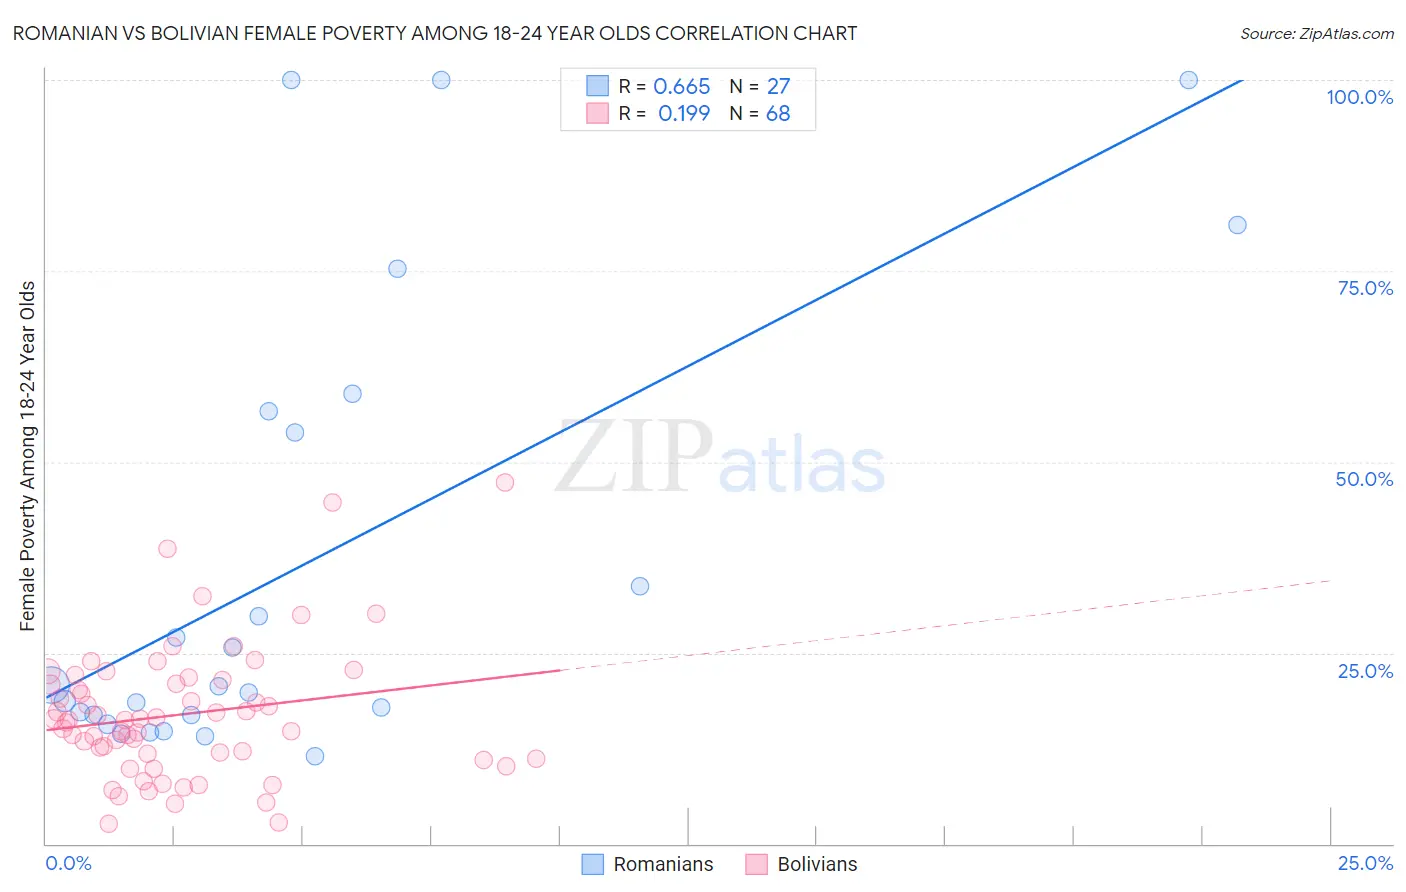 Romanian vs Bolivian Female Poverty Among 18-24 Year Olds